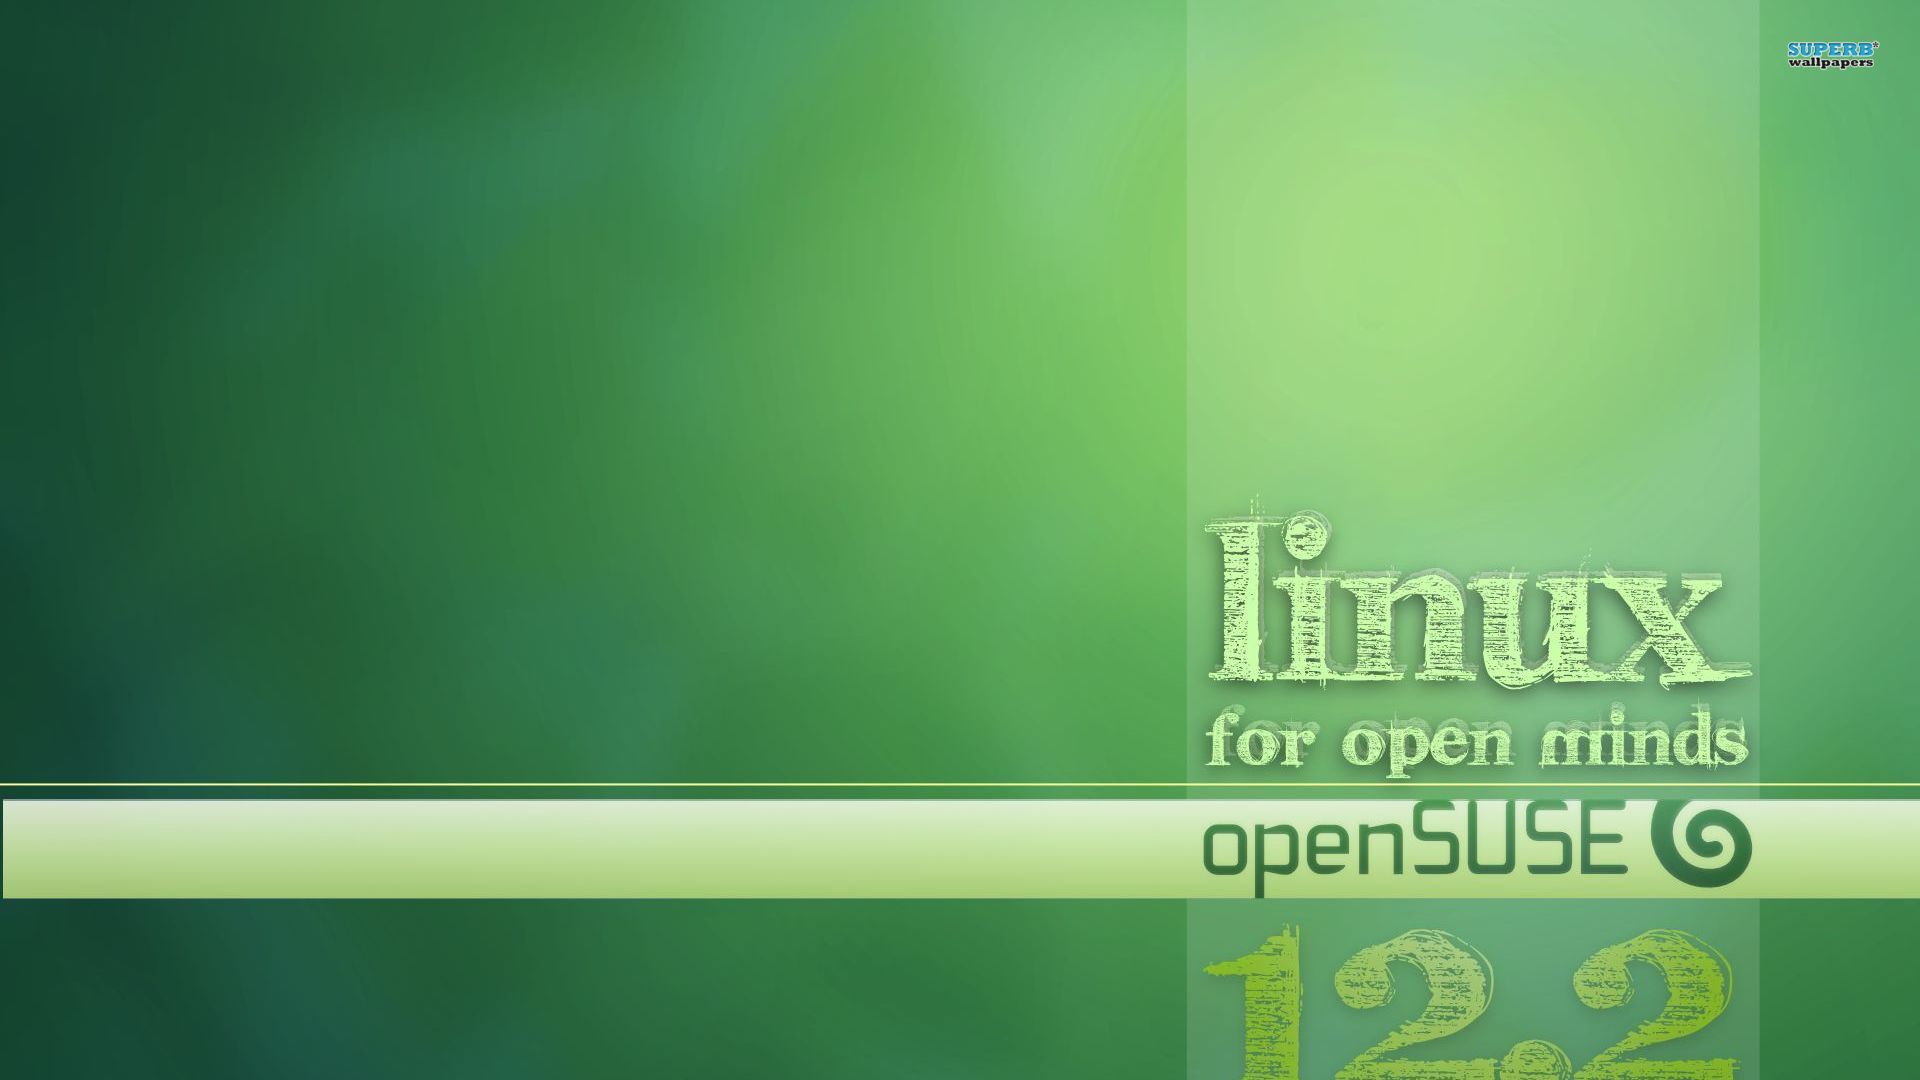 openSUSE 12.2 wallpaper - Computer wallpapers - #10898